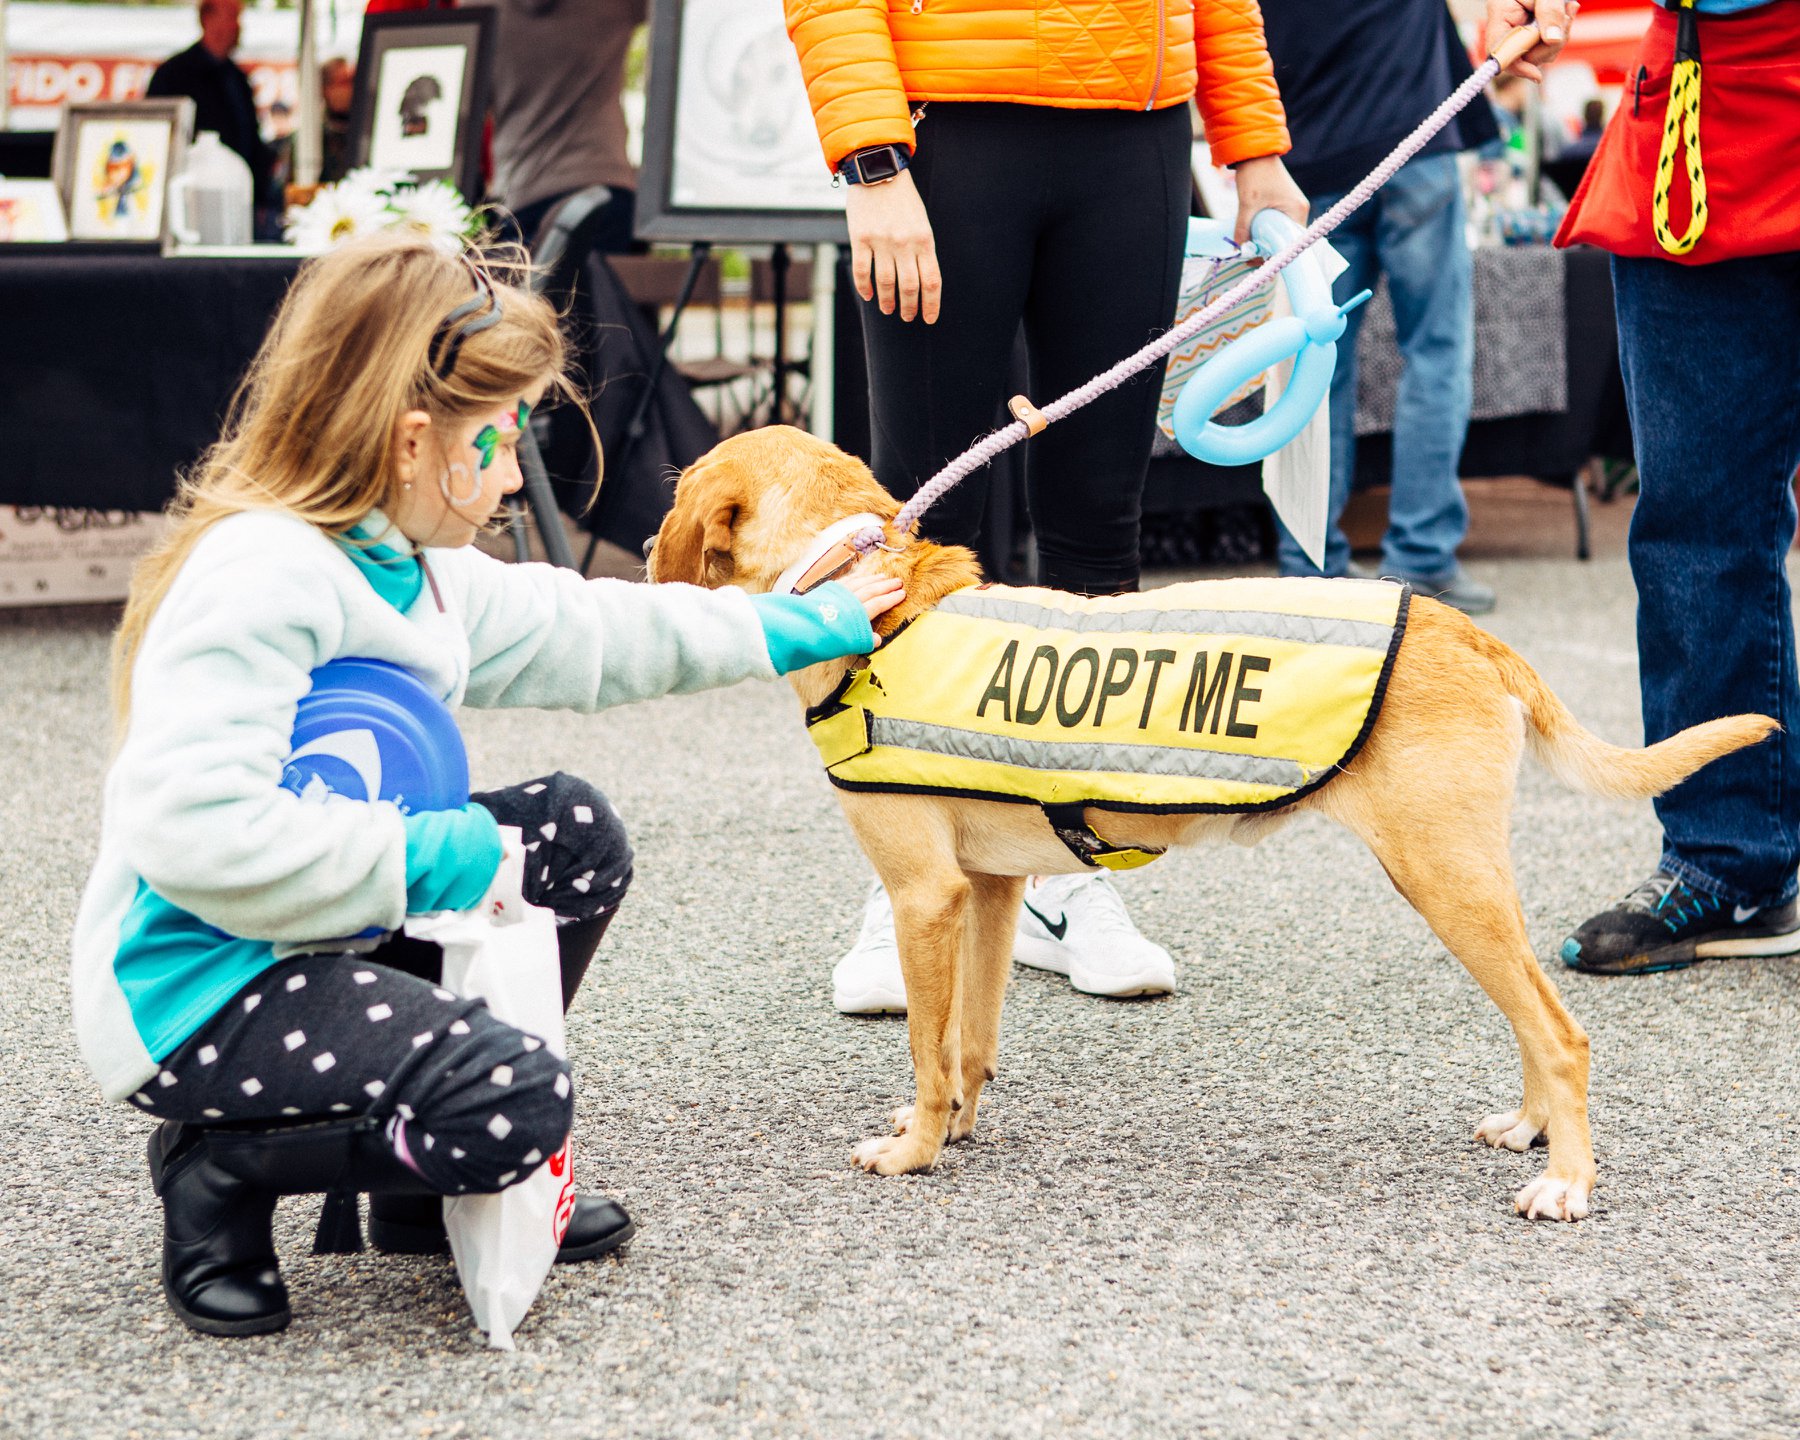 Adoptions at Fido Fest in Birmingham. Photo via The Summit Birmingham 7 pet-loving events in Birmingham, including Croonin' For Critters on March 21